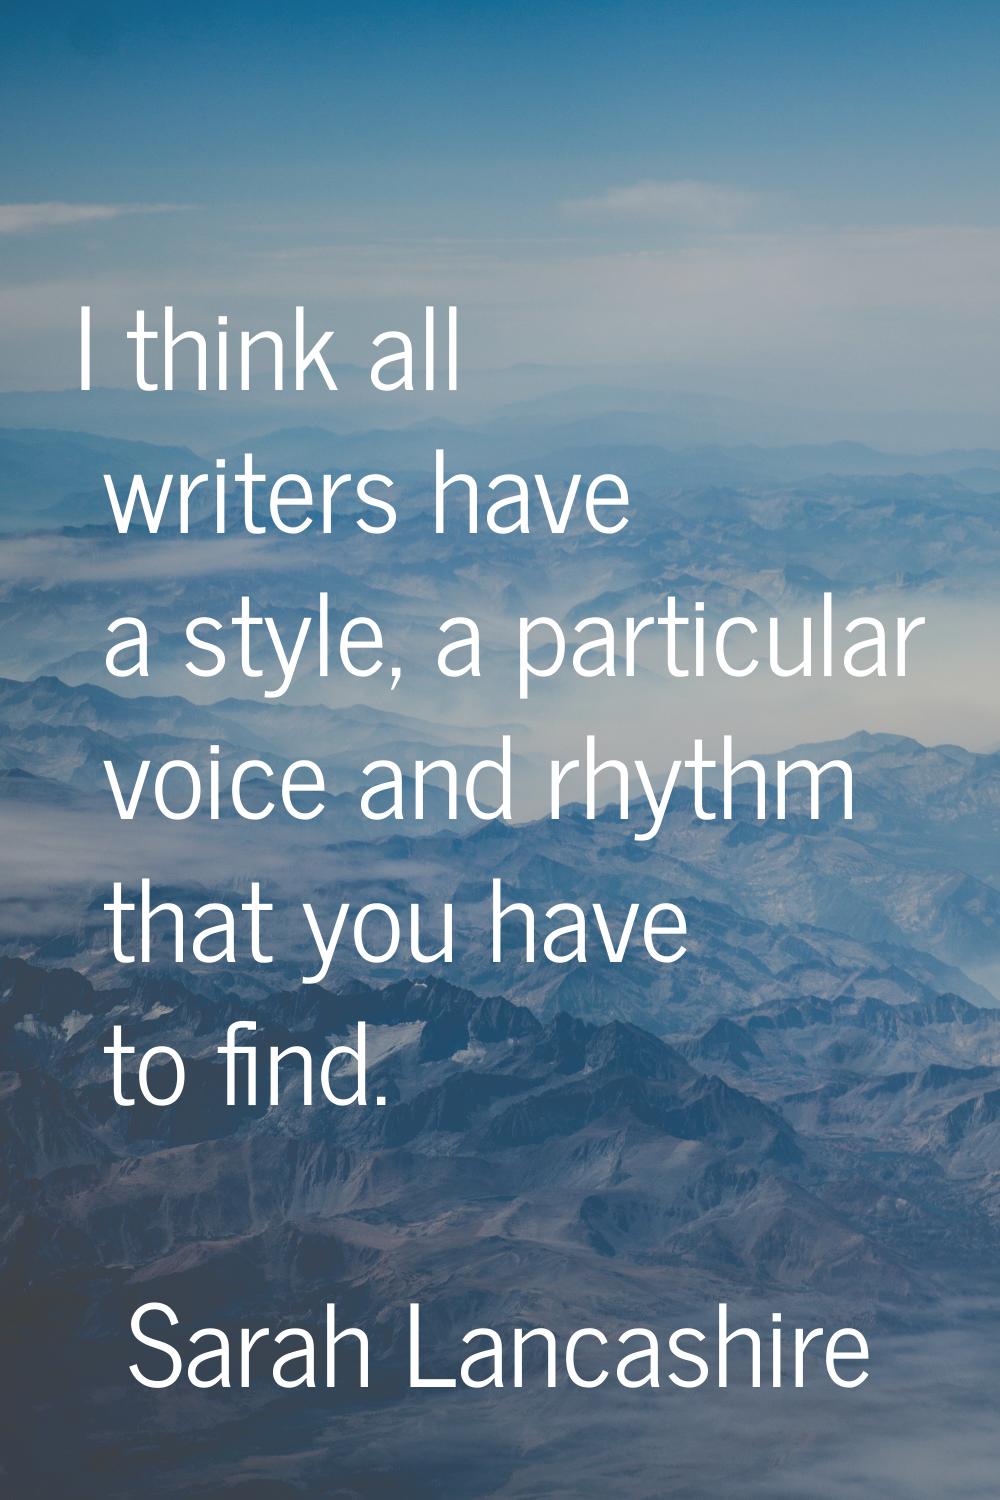 I think all writers have a style, a particular voice and rhythm that you have to find.